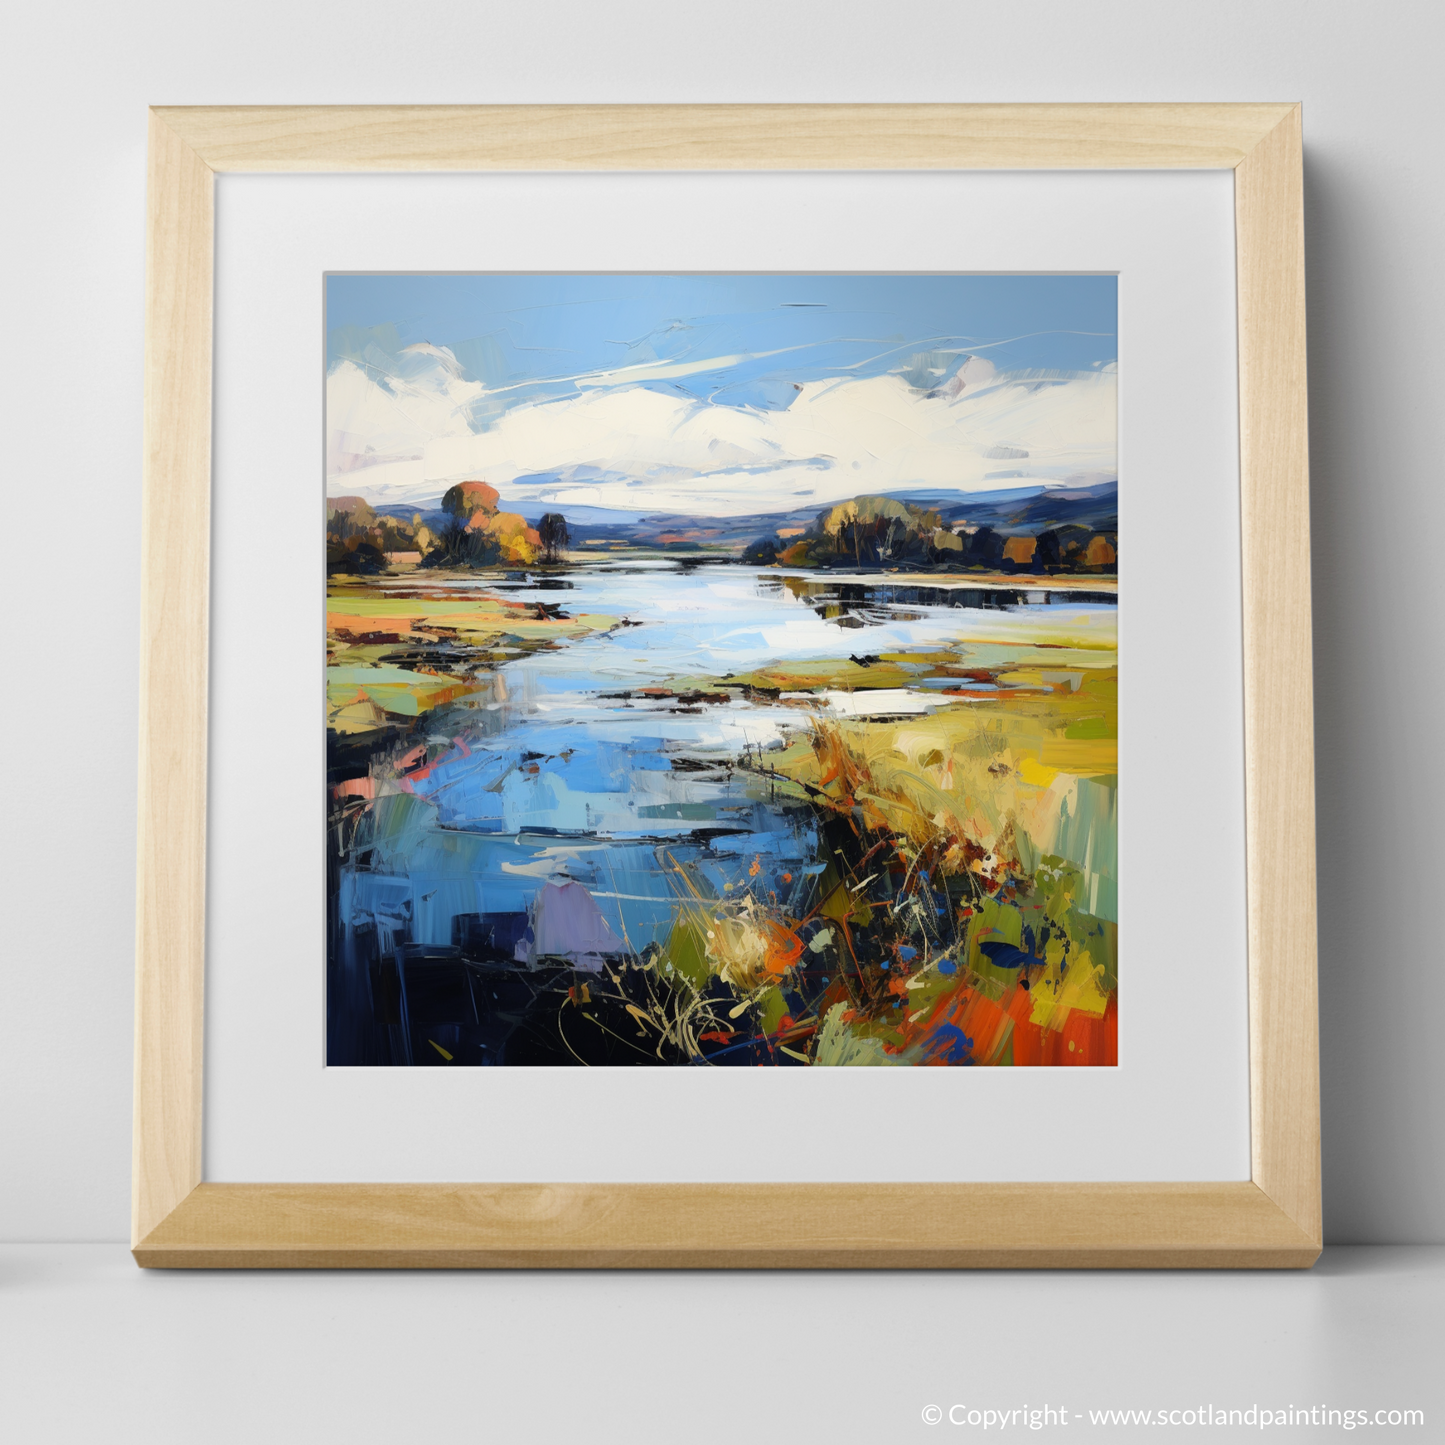 Painting and Art Print of River Nith, Dumfries and Galloway. Vibrant Symphony of the River Nith.